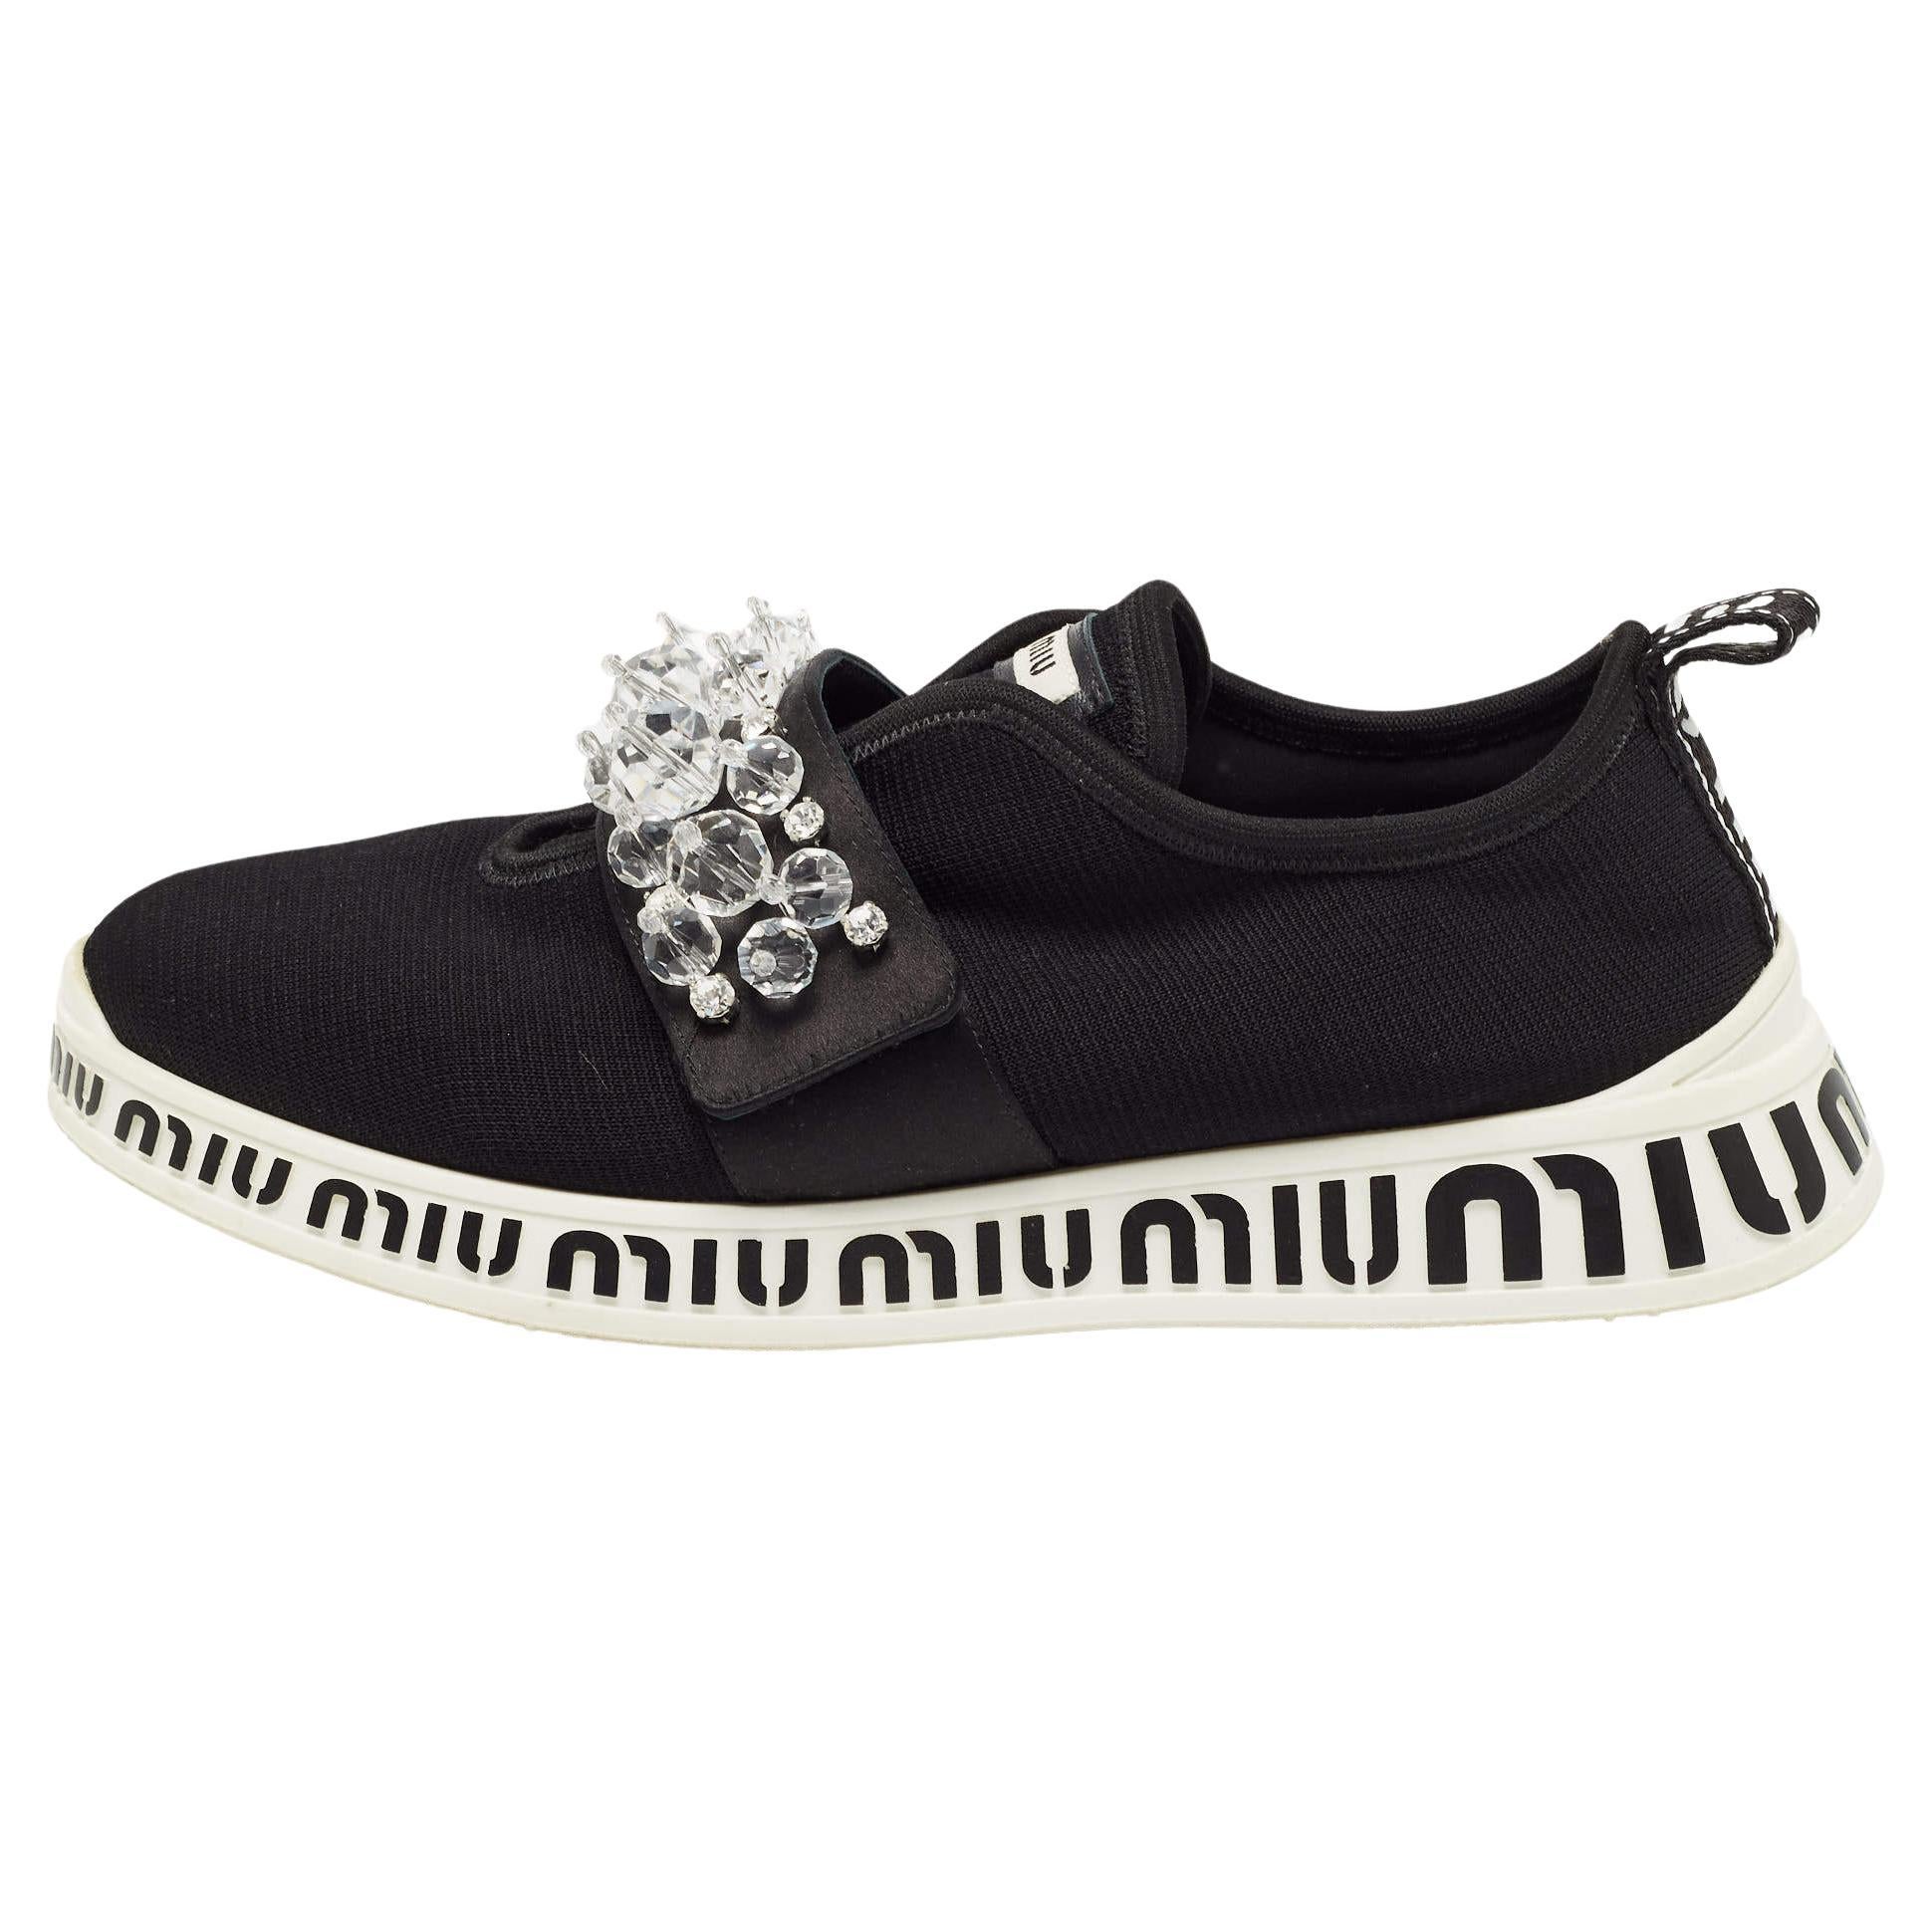 Miu Miu Black Fabric and Satin Crystal Embellished Slip On Sneakers Size 38.5 For Sale